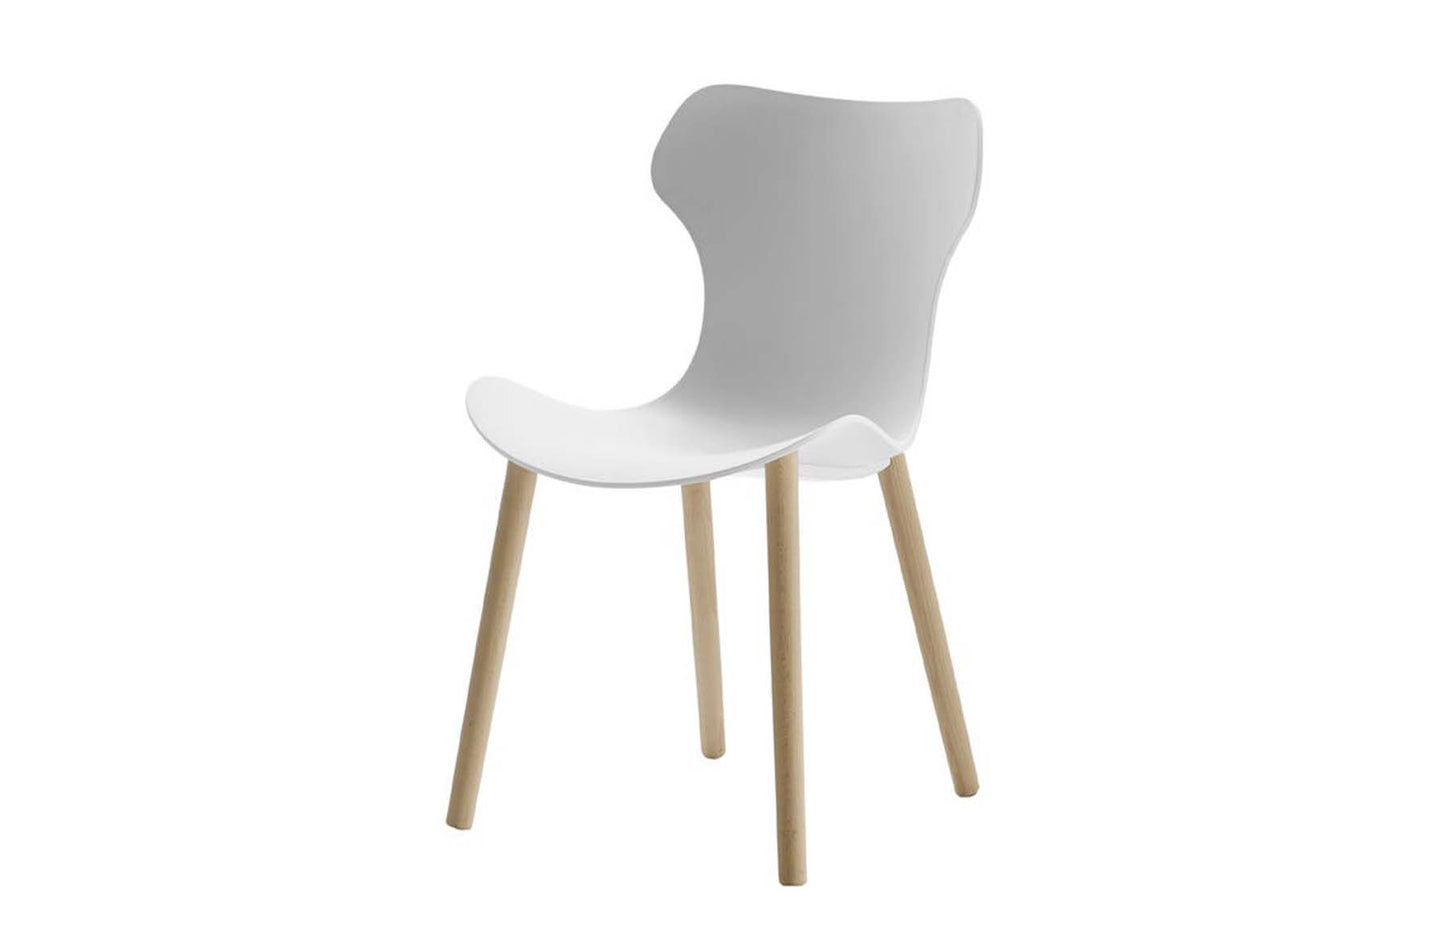 Papilio Shell Chair with Oak Legs - White Shell
